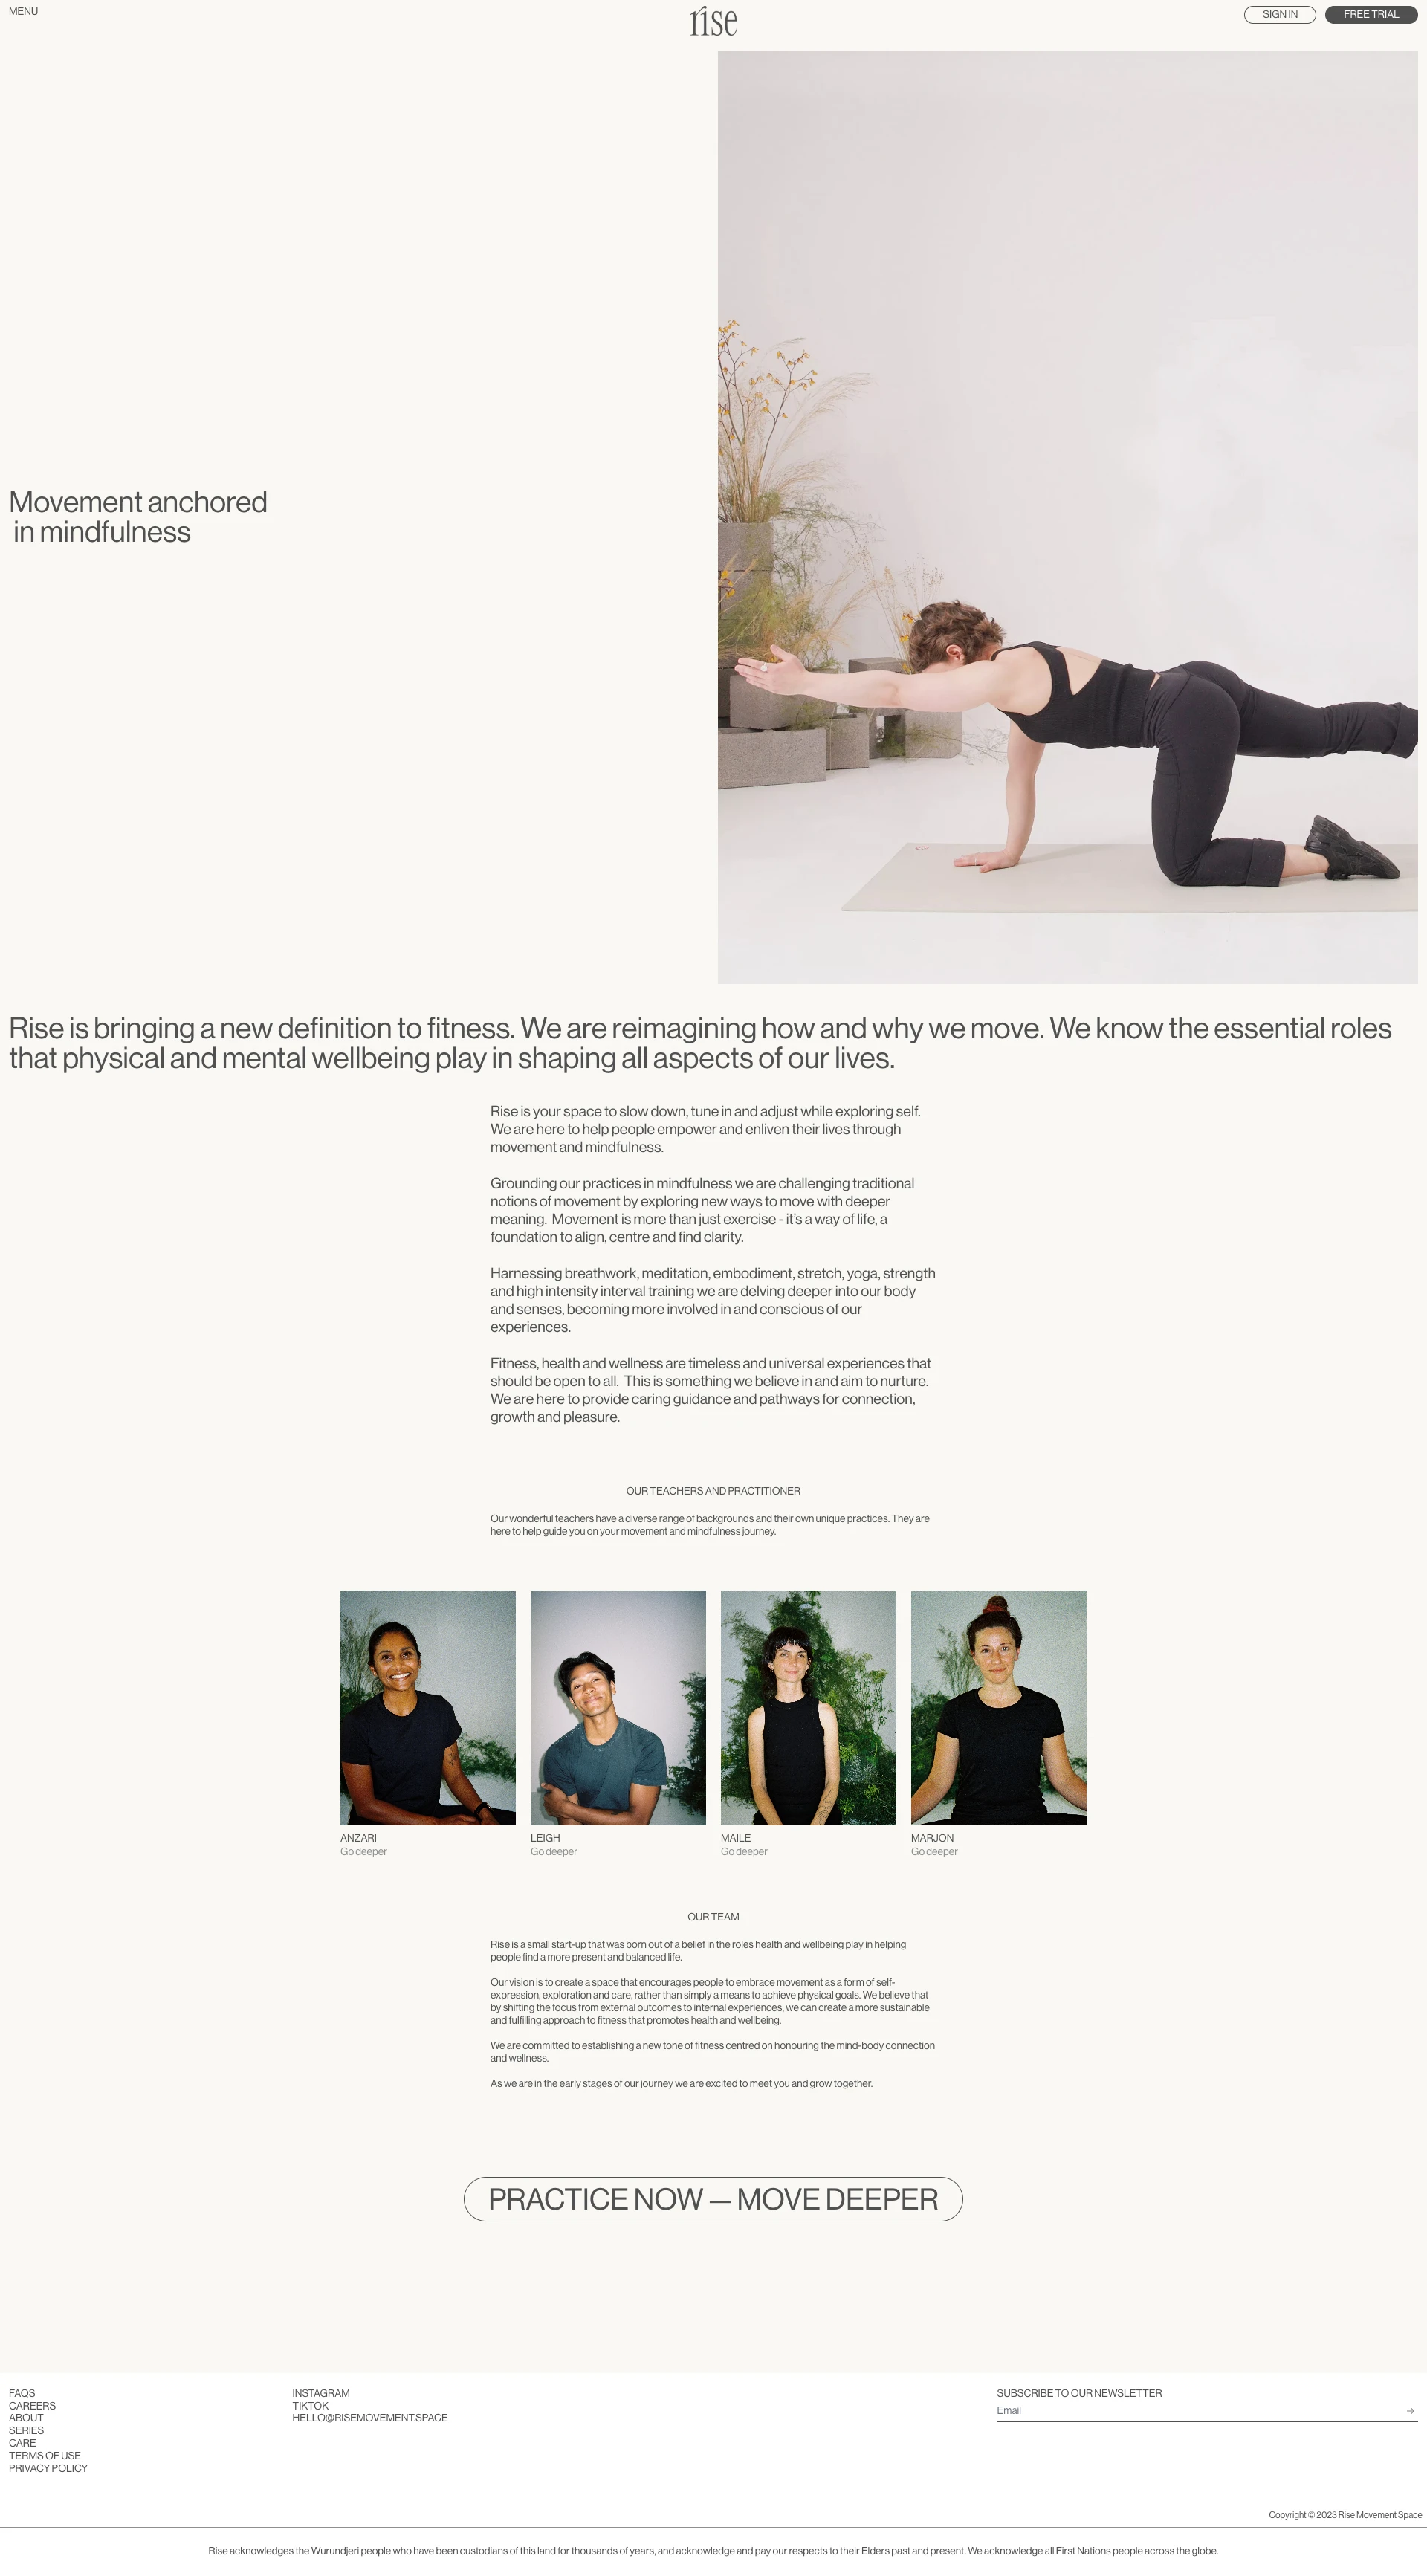 Rise Landing Page Example: Rise is an online wellness and fitness platform linking movement to mindfulness. Our holistic approach emphasises the mind-body connection, inviting awareness, exploration and curiosity into the ways we experience our bodies. This is a space to enliven the senses, create rituals and move deeper.